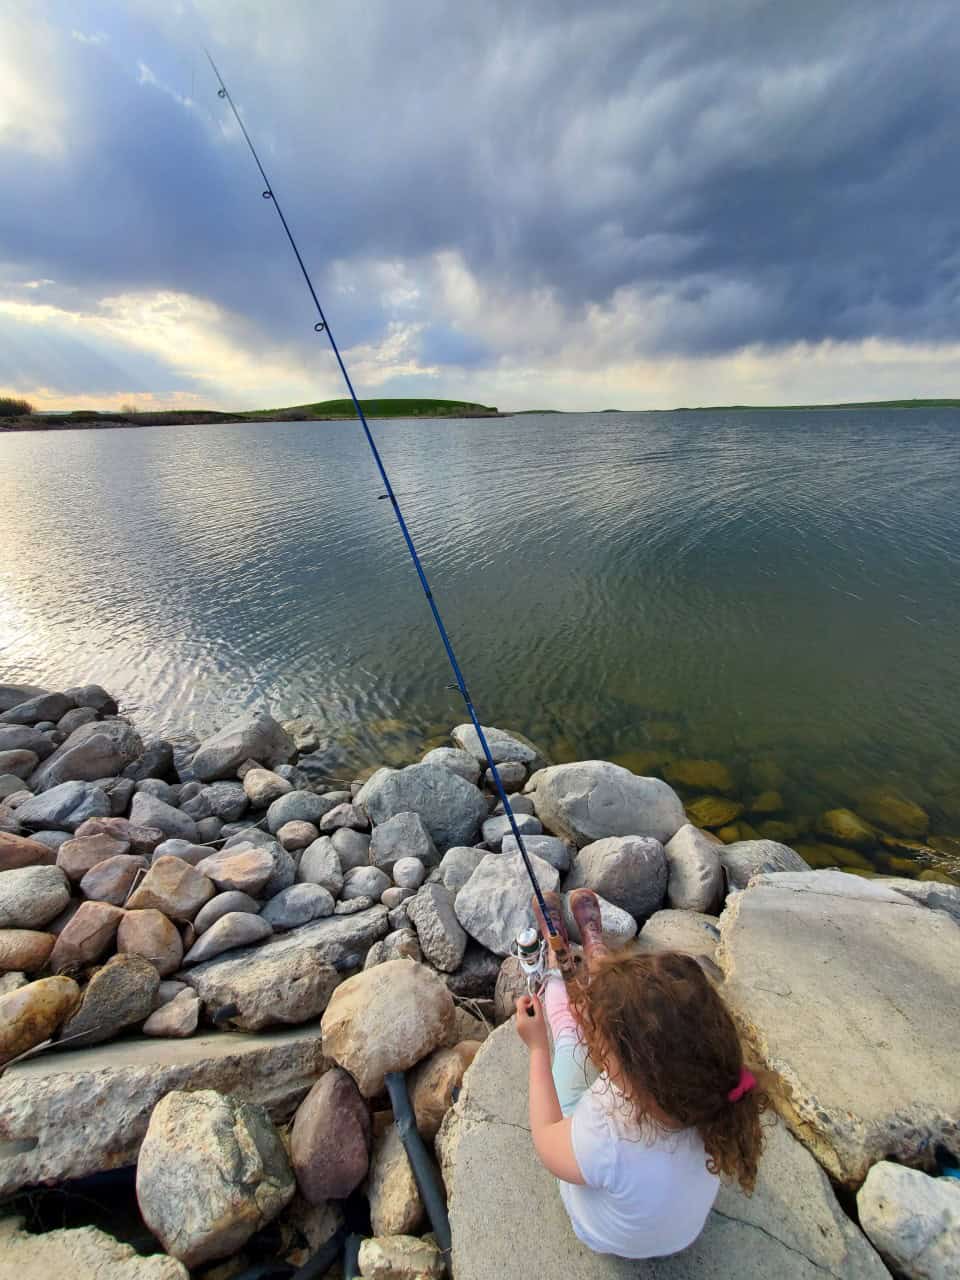 Shore Fishing is Easy on Clear Lake - Easy to settle in on shore with the kids and take a few casts for some northern pike.